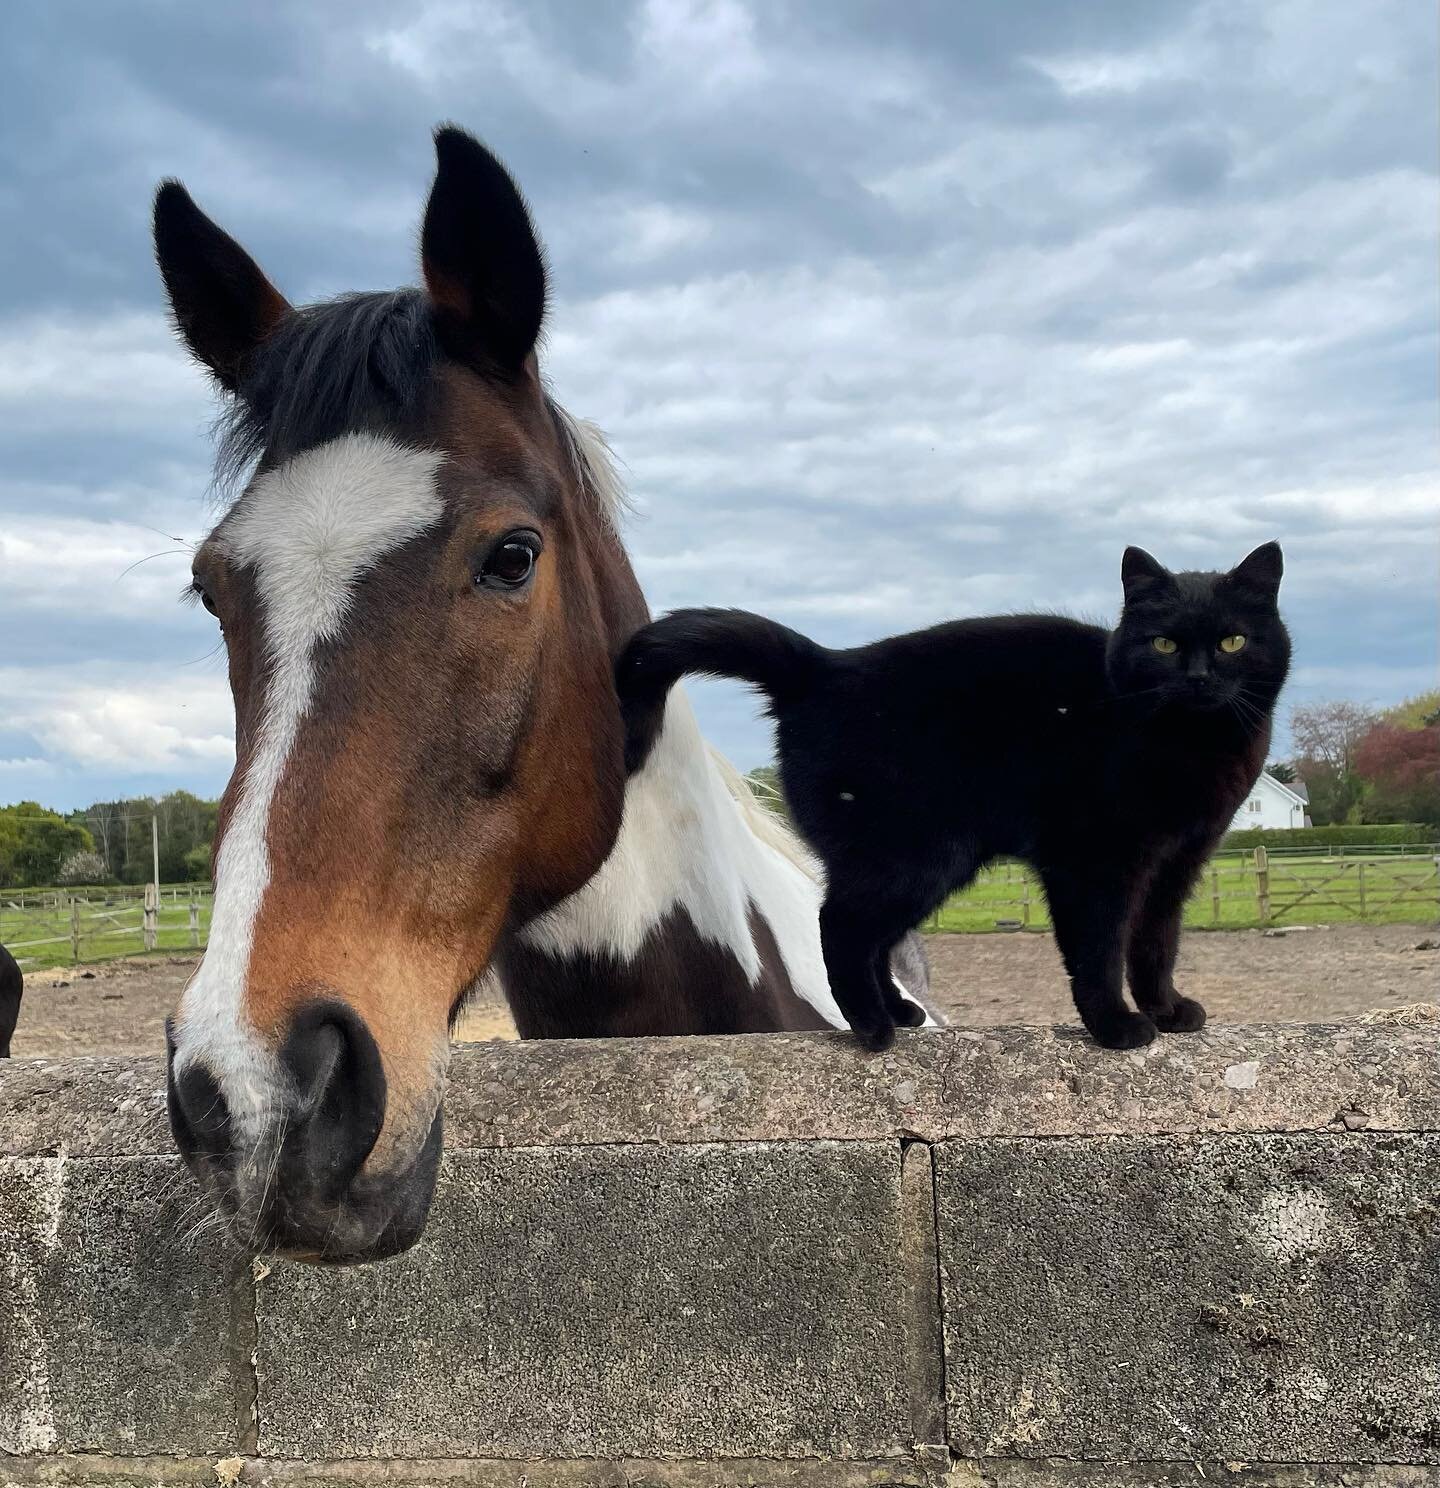 ⭐️ 𝐈𝐧𝐭𝐫𝐨𝐝𝐮𝐜𝐢𝐧𝐠 . . . George! A very intelligent lad, he's got sweet eyes but is often playing with the others! Magic, also in the picture, is another one of his (much smaller!) four legged friends. ⭐️ #pony#riding#horse#horse-riding#ukridi